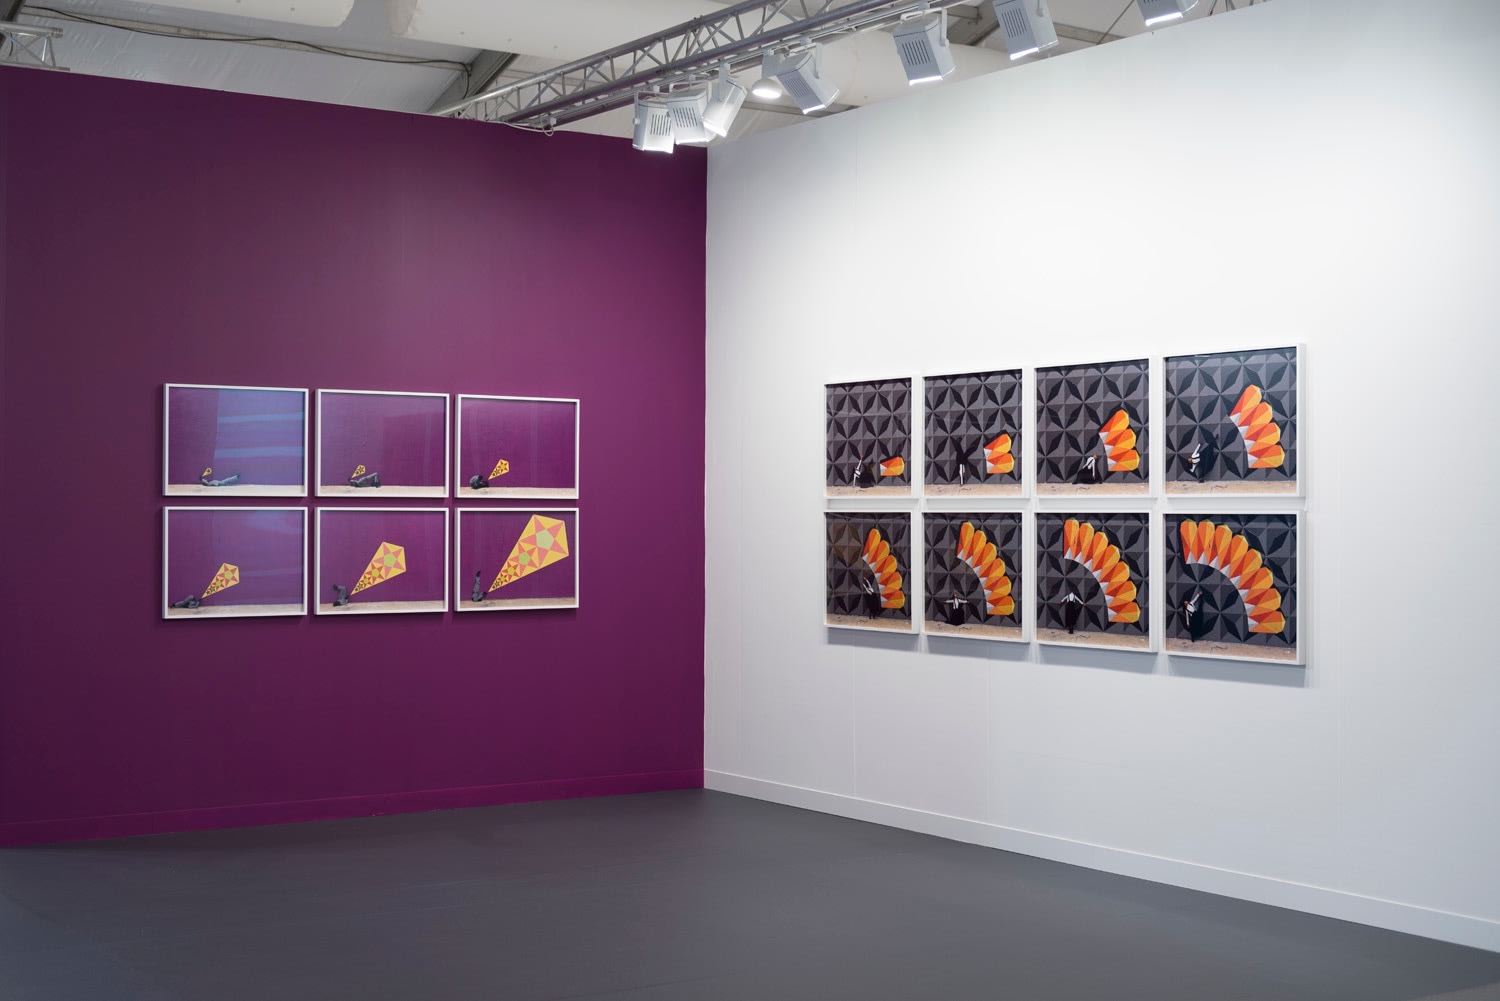 Installation view of Lehmann Maupin's booth at Frieze art fair in London 2019, view 8